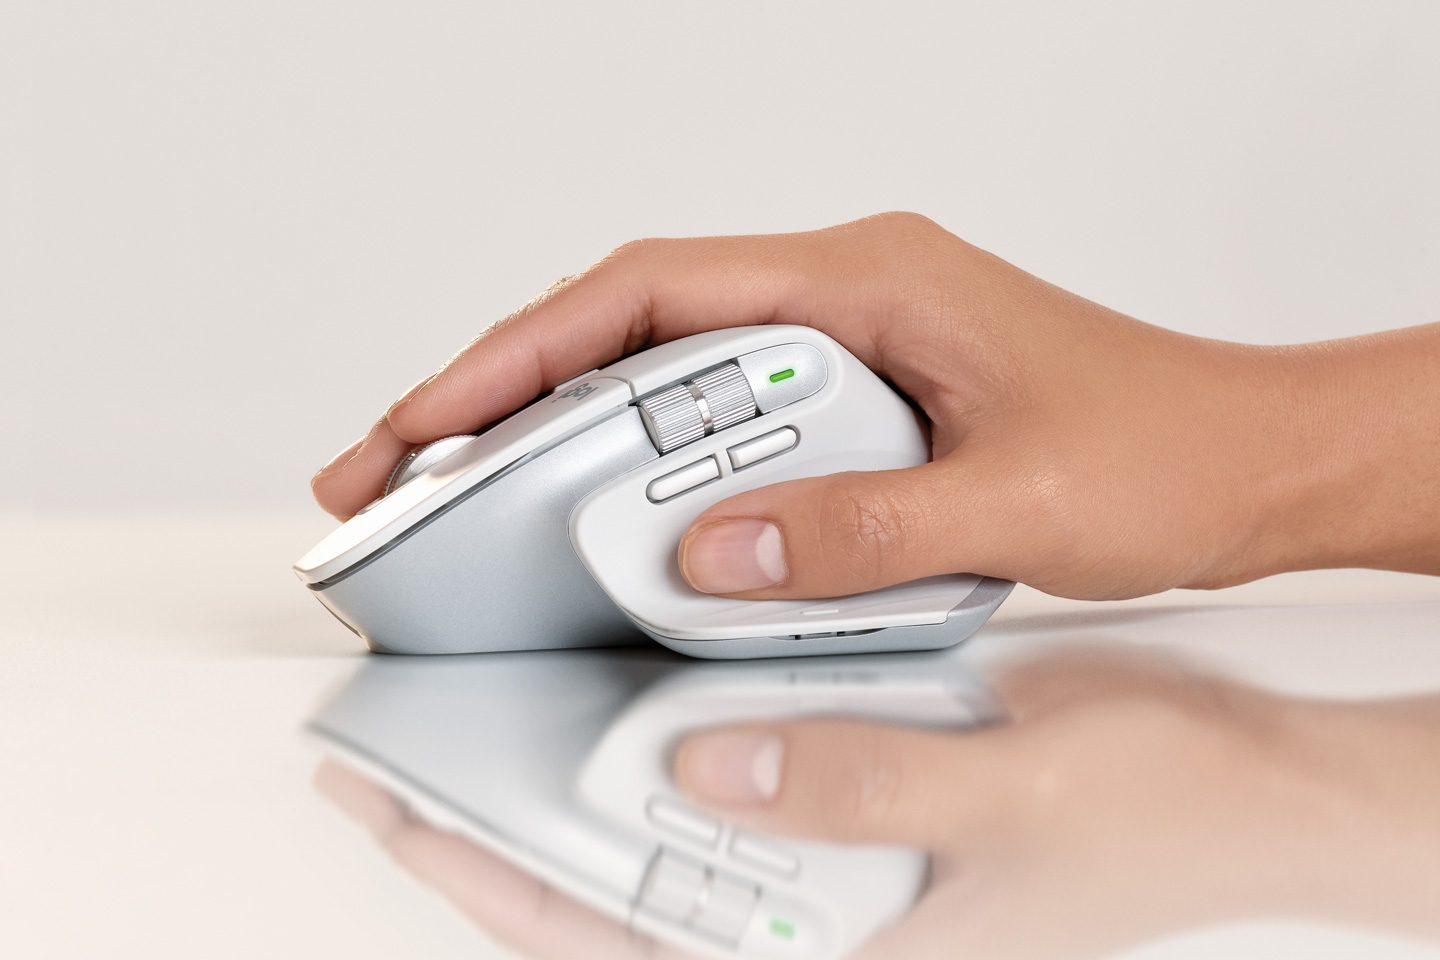 Logitech expands its MX series Mouse Mechanical new Yanko Master the Keyboard a - and with 3S Design